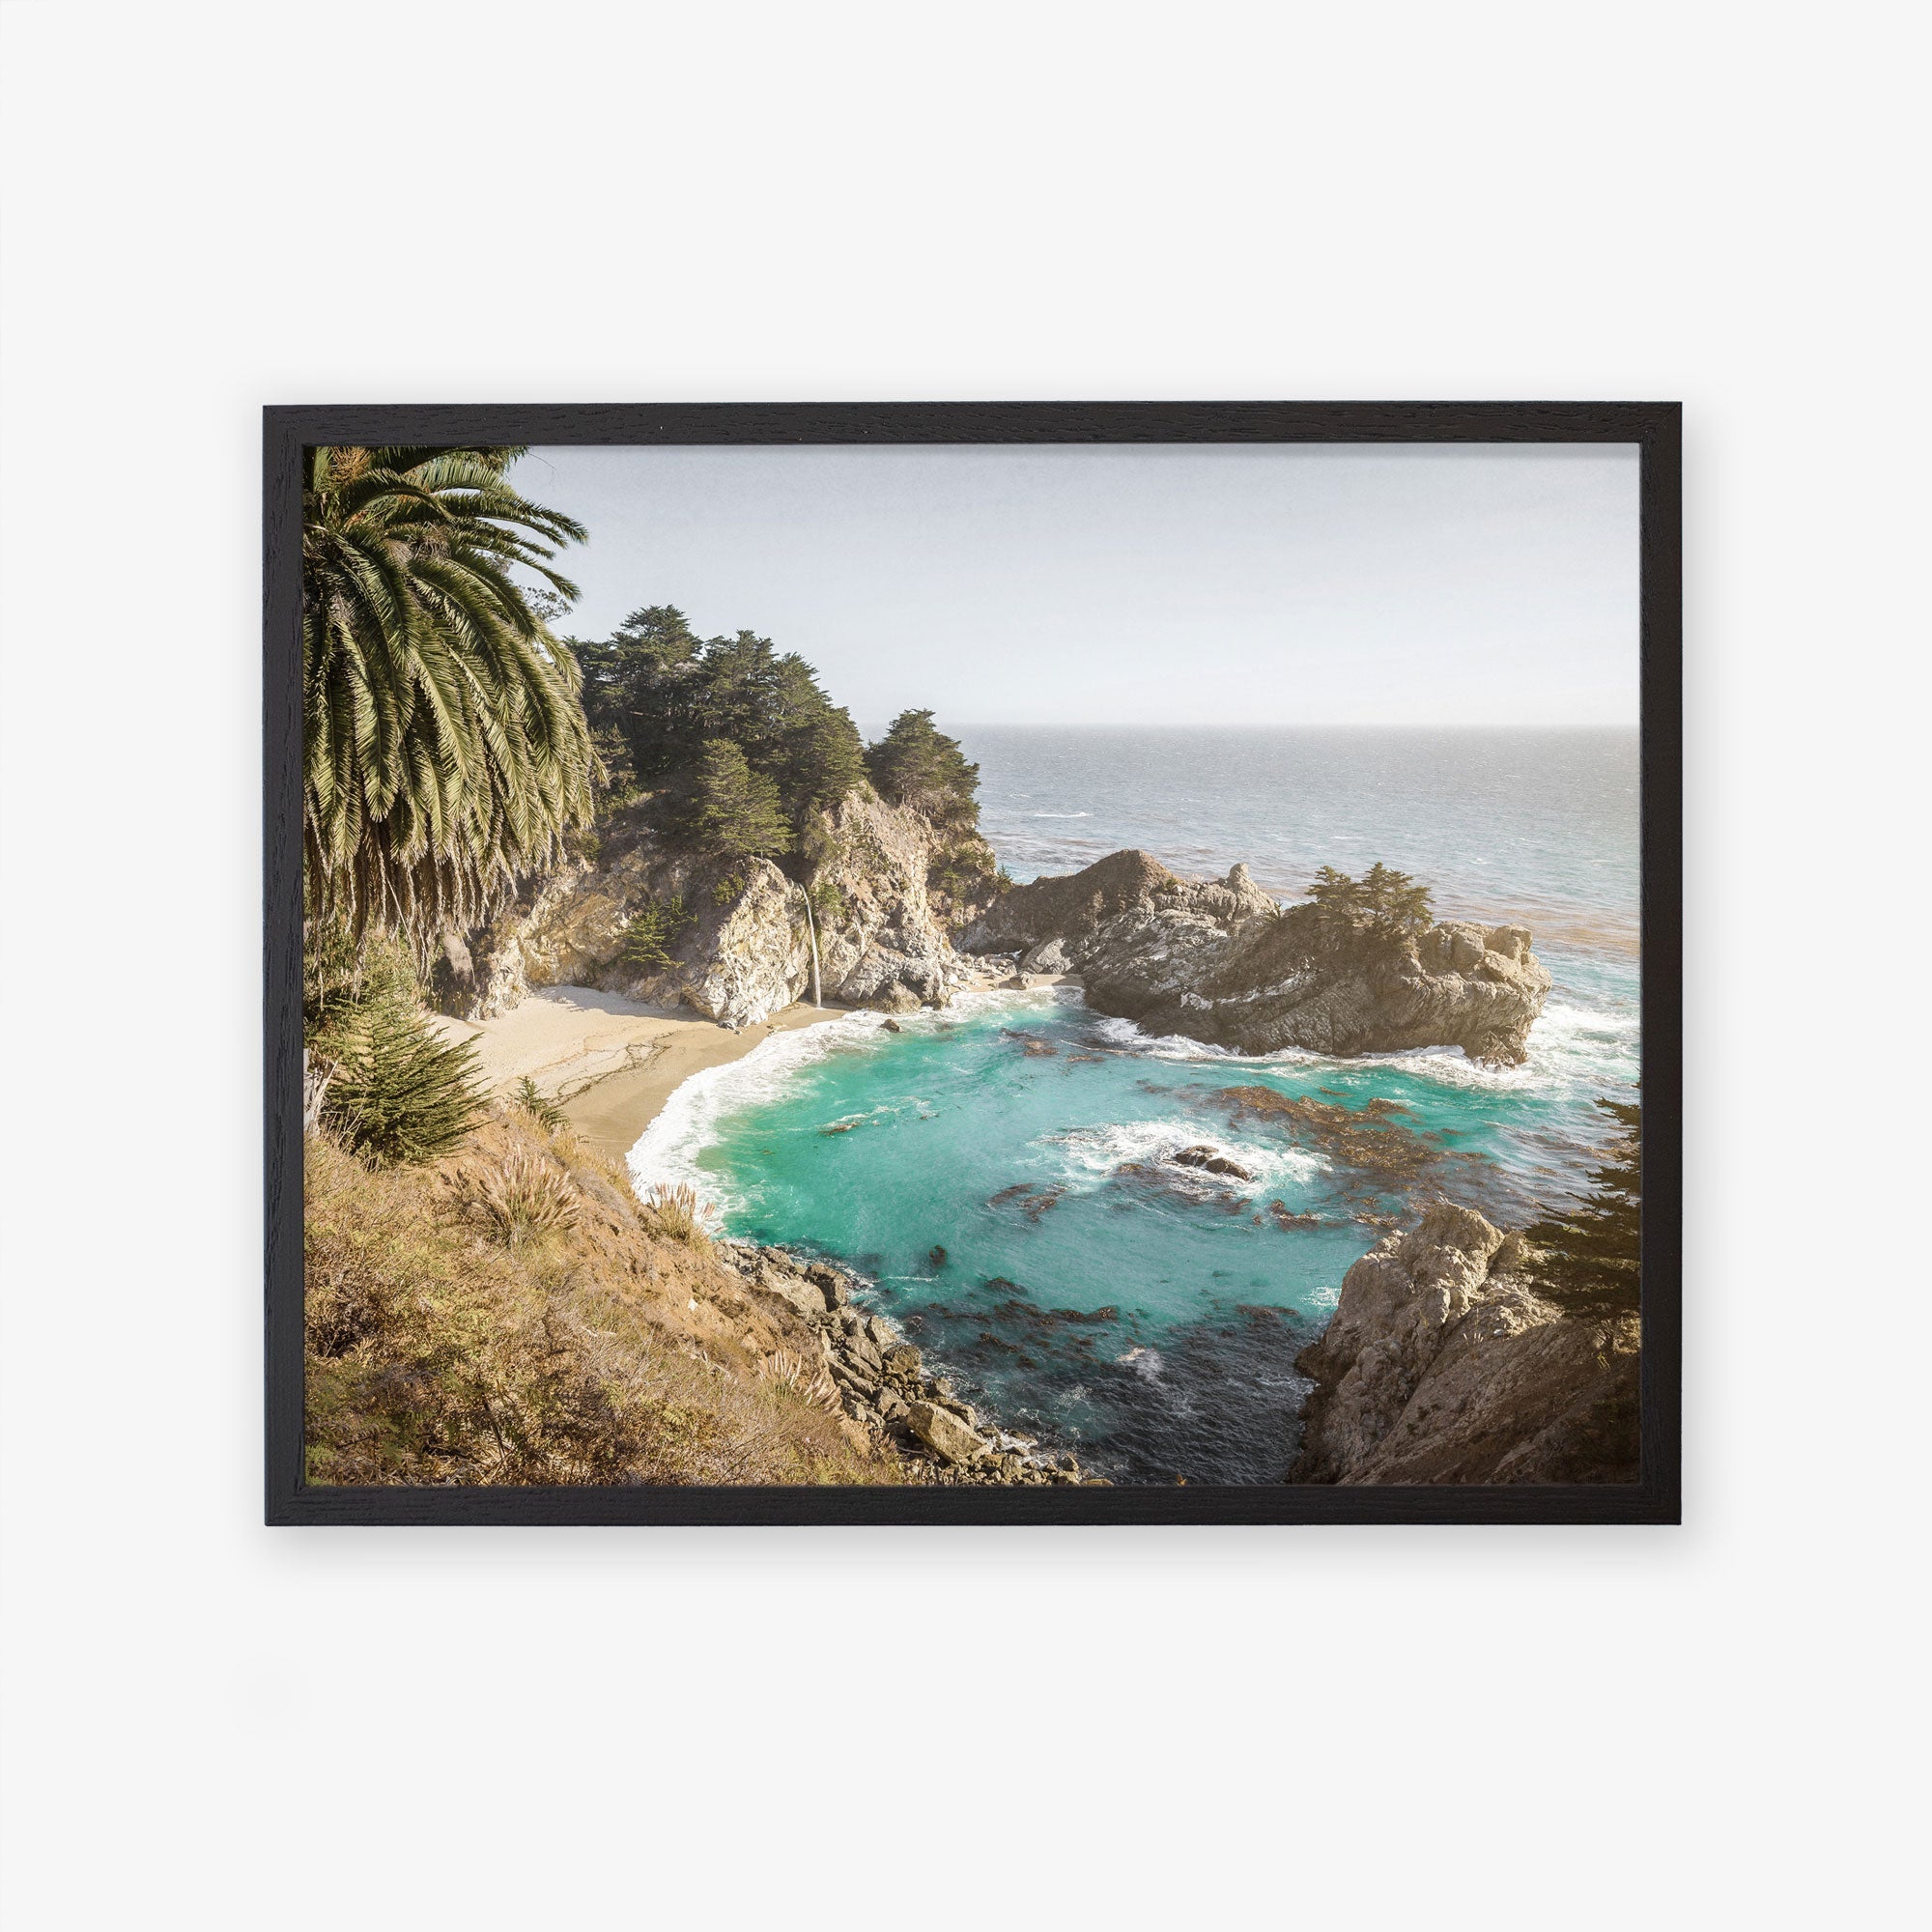 A framed photograph of a Offley Green Big Sur Coastal Print, &#39;Julia Pffeifer&#39; featuring rocky cliffs with a small sandy cove and turquoise waters, surrounded by lush greenery and tall palm trees.